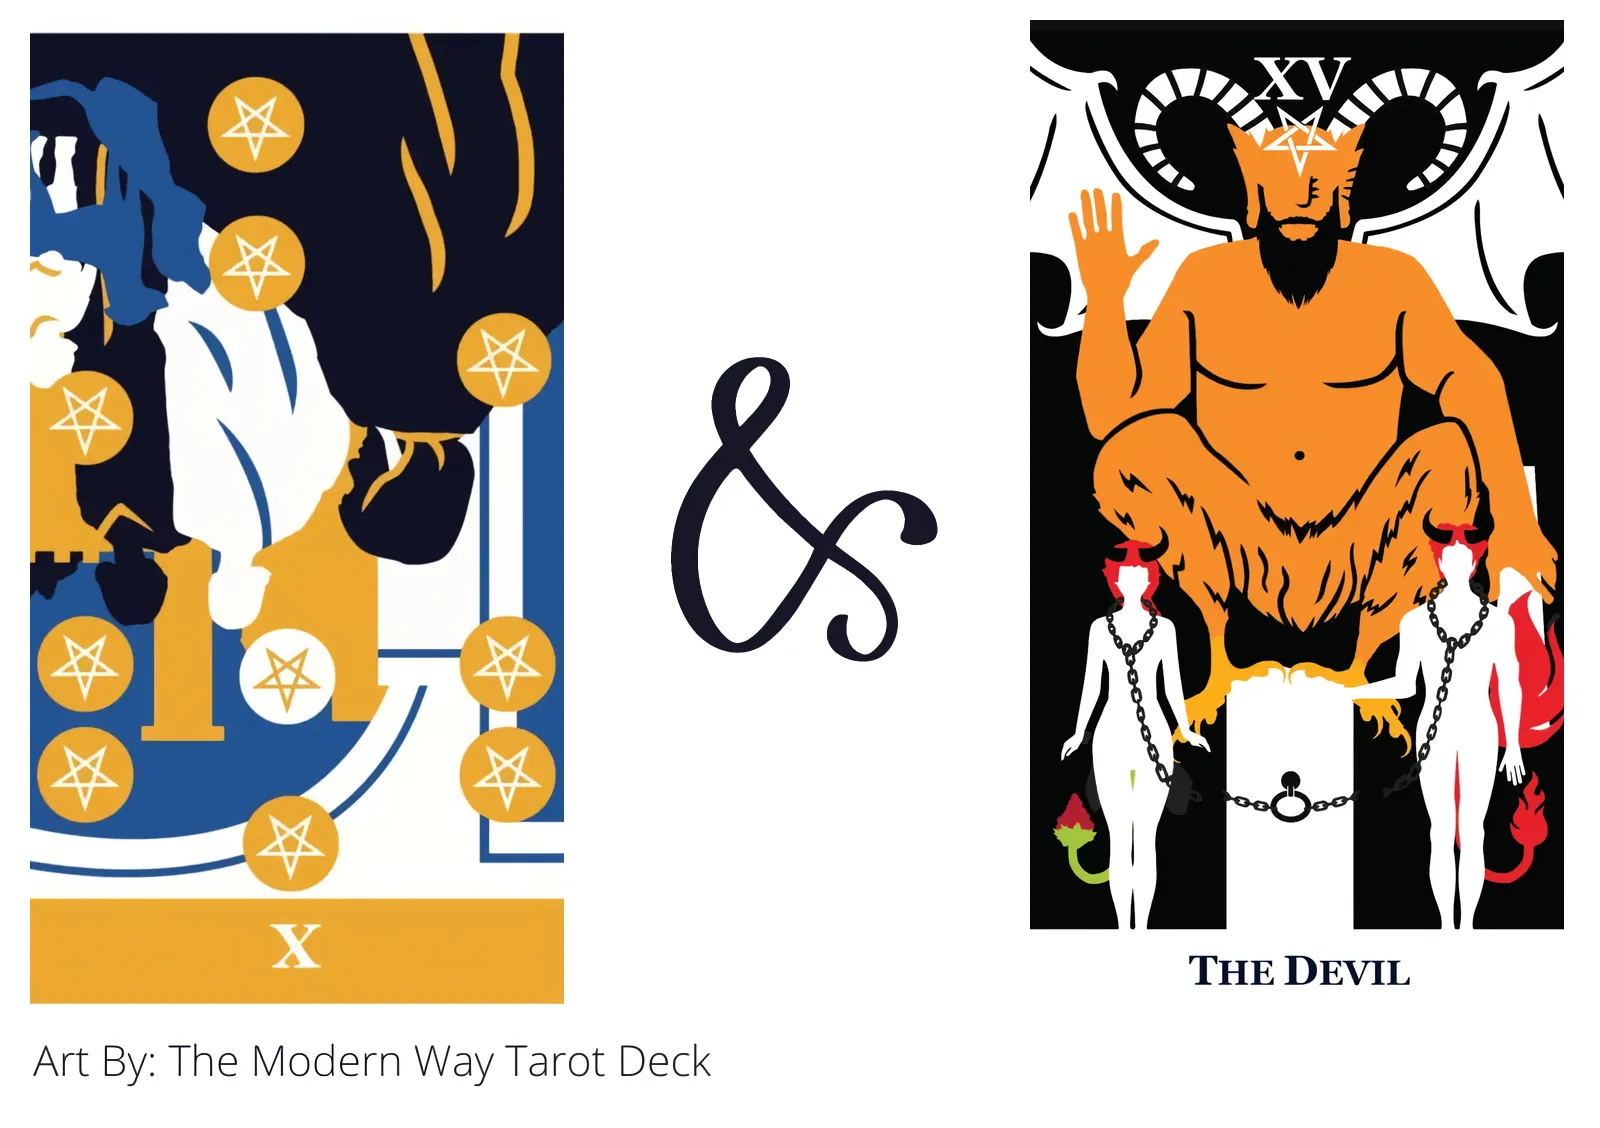 ten of pentacles reversed and the devil tarot cards together